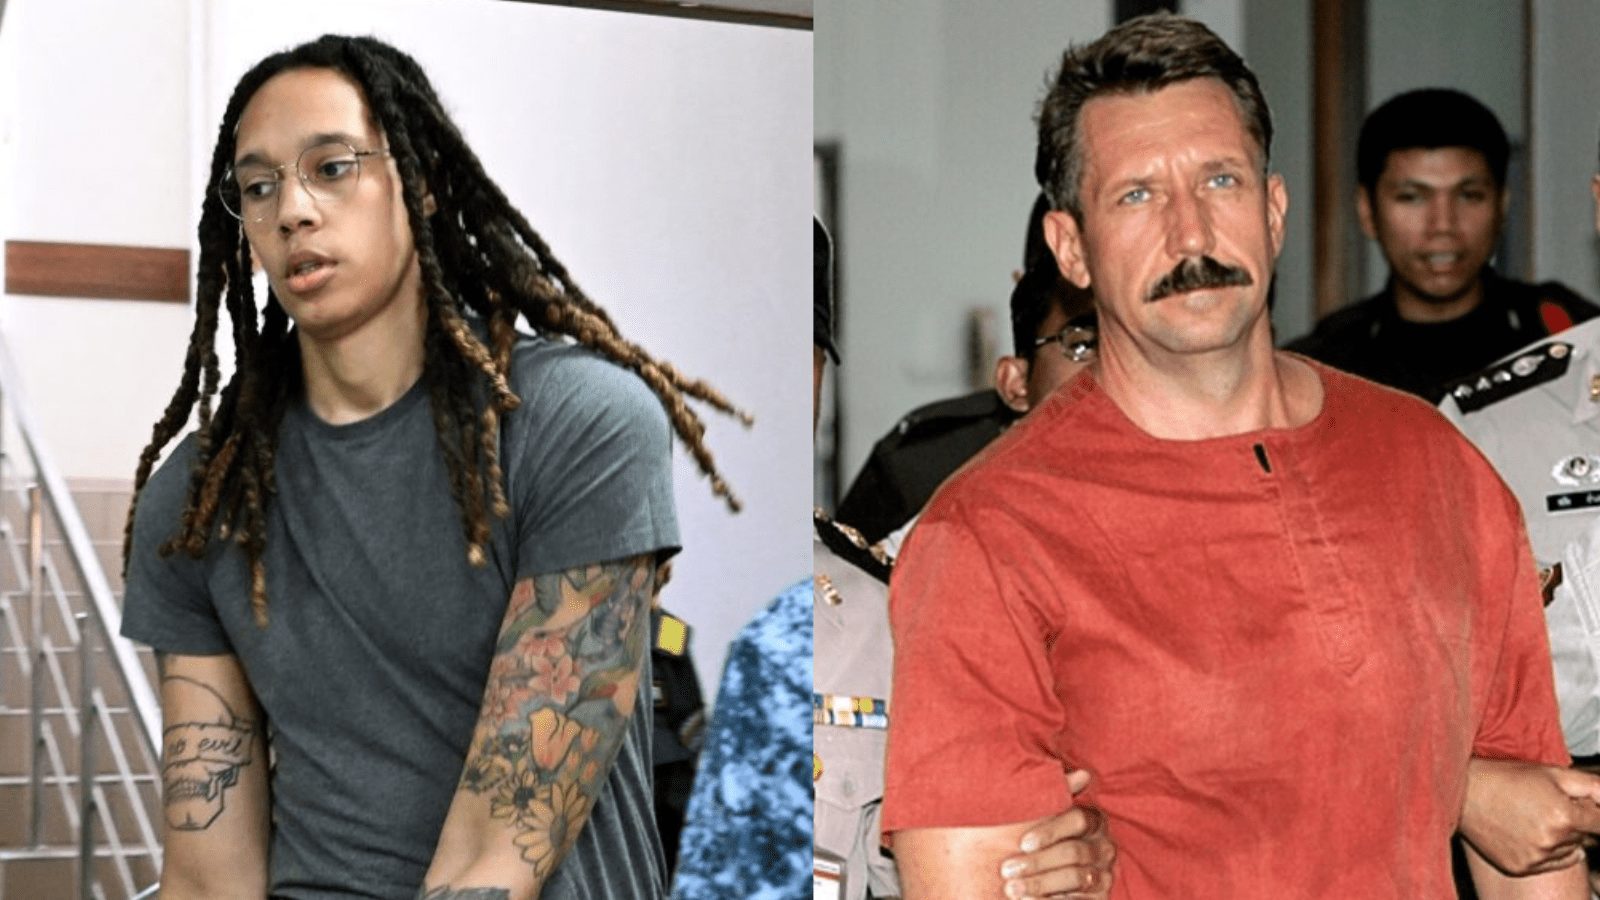 Brittney Griner is currently jailed in Russia (Left) while Viktor Bout the "Merchant of Death," is currently serving a 25-year sentence in a federal prison in Illinois.